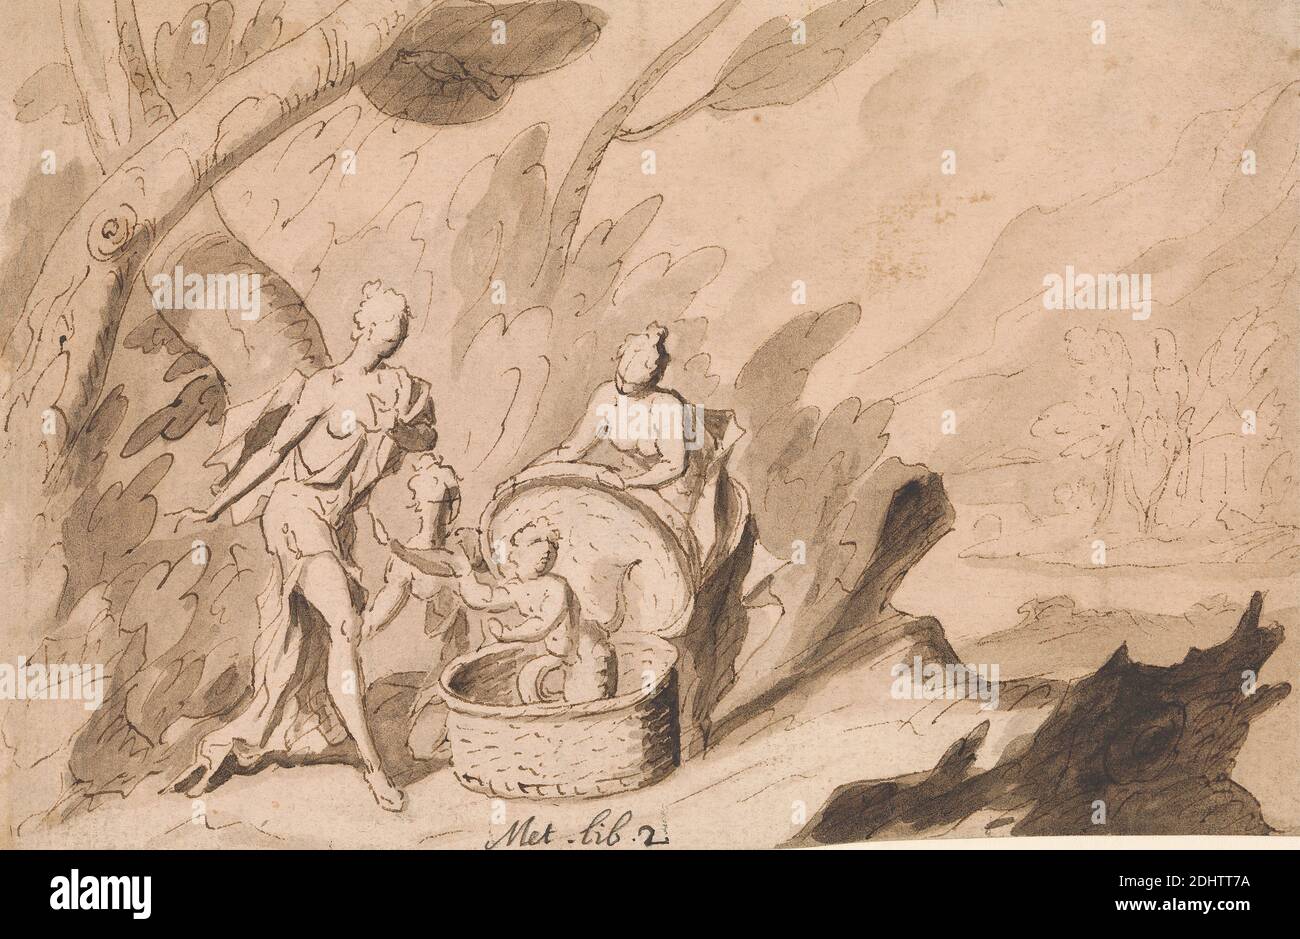 The Daughters of Cecrops discover Ericthonius: Ovid, Metamorphoses, Book 2, Thomas Carwitham, active 1723, British, 1723, Pen, ink and brown wash on medium, slightly textured, white wove paper, Sheet: 5 × 7 1/2 inches (12.7 × 19.1 cm), basket, crow (animal), Erichthonius, hidden in a basket, is handed over by Minerva to Aglauros and her sisters (Cecrops' daughters) to be taken care of, figures, forest, literary theme, Ovid's Metamorphoses, religious and mythological subject Stock Photo